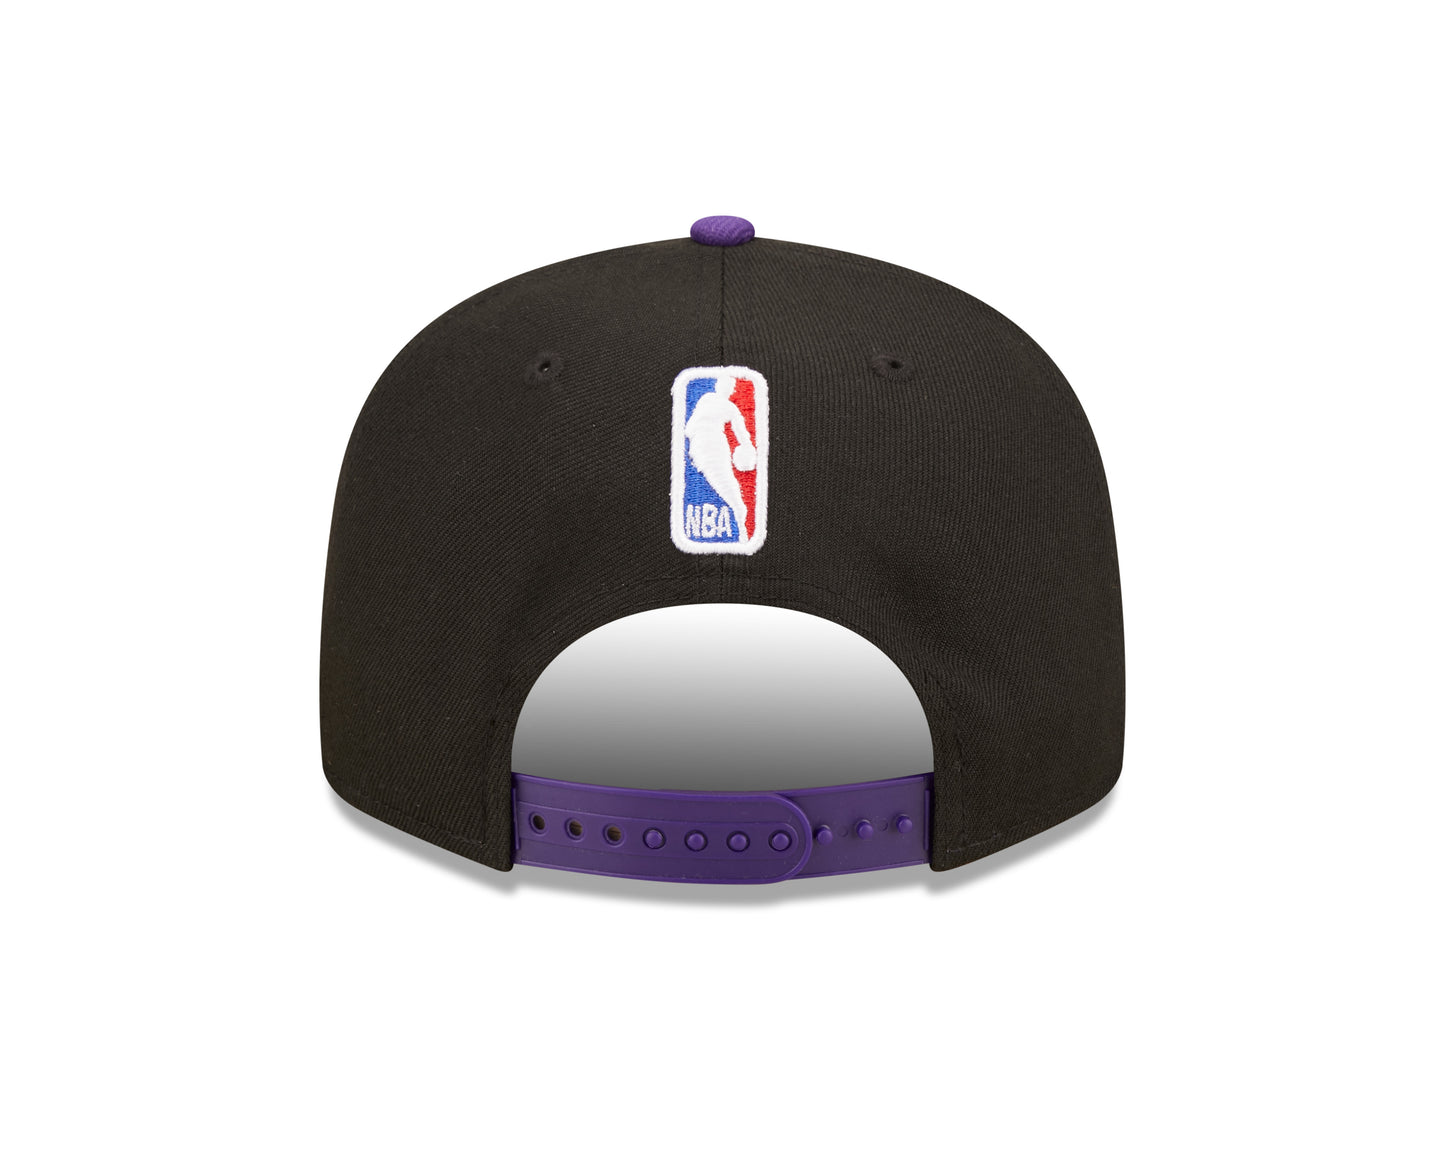 Los Angeles Lakers New Era Tip-Off 9FIFTY Snap Back Hat - Purple/Black